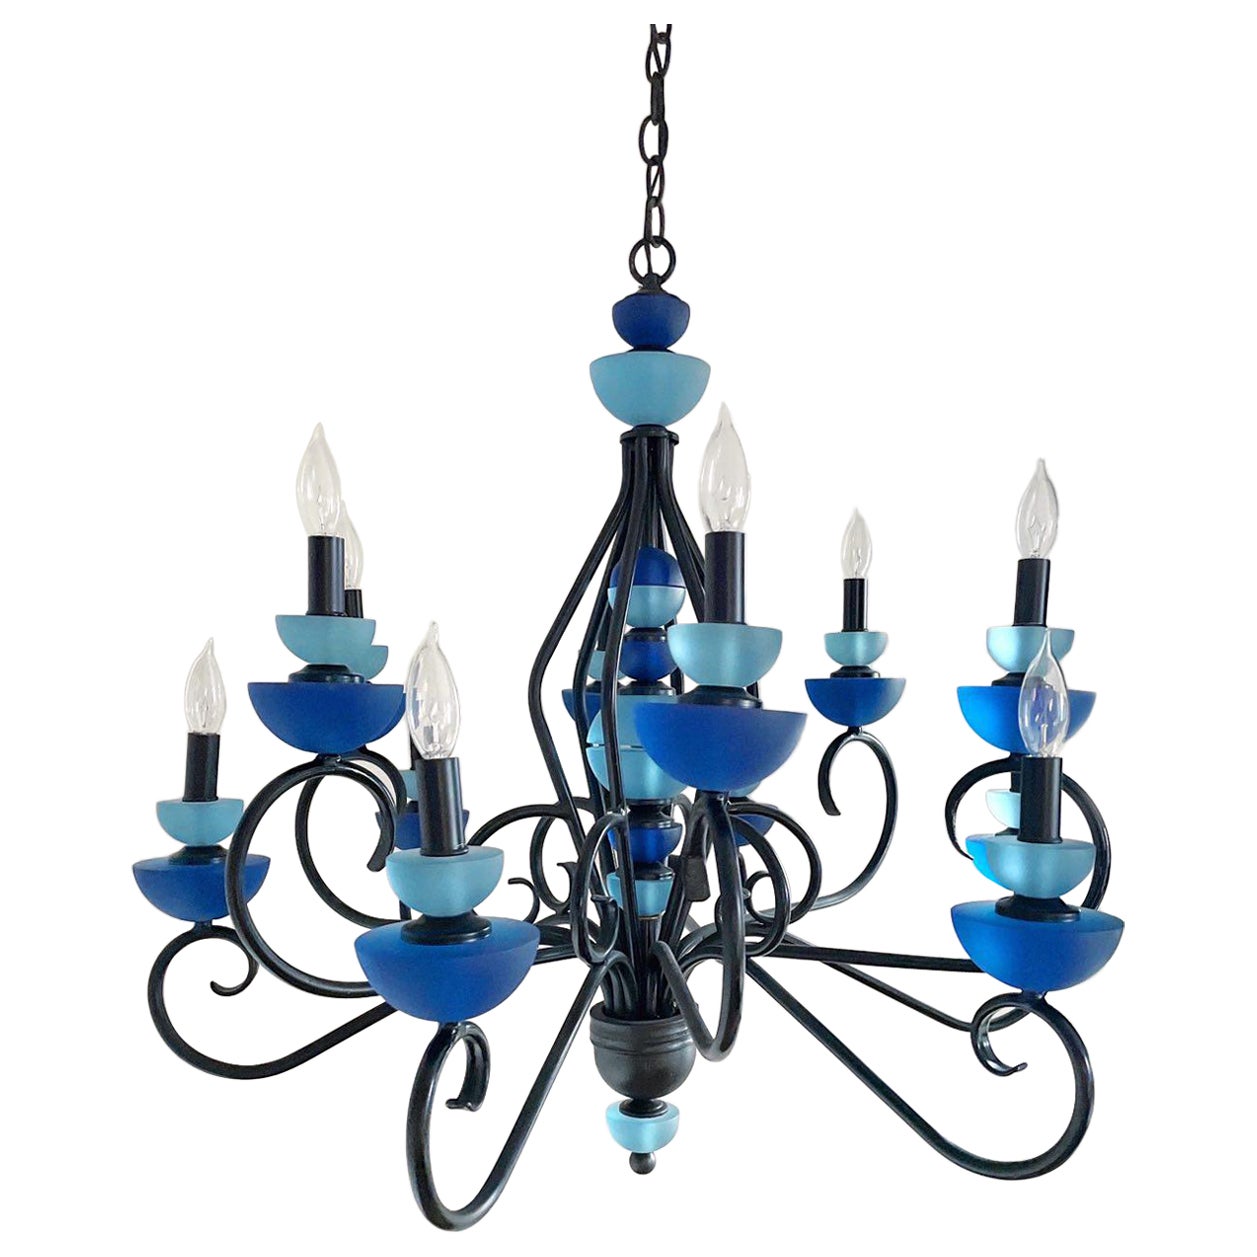 Hivo Van Teal Wrought Iron and Blue Lucite Chandelier